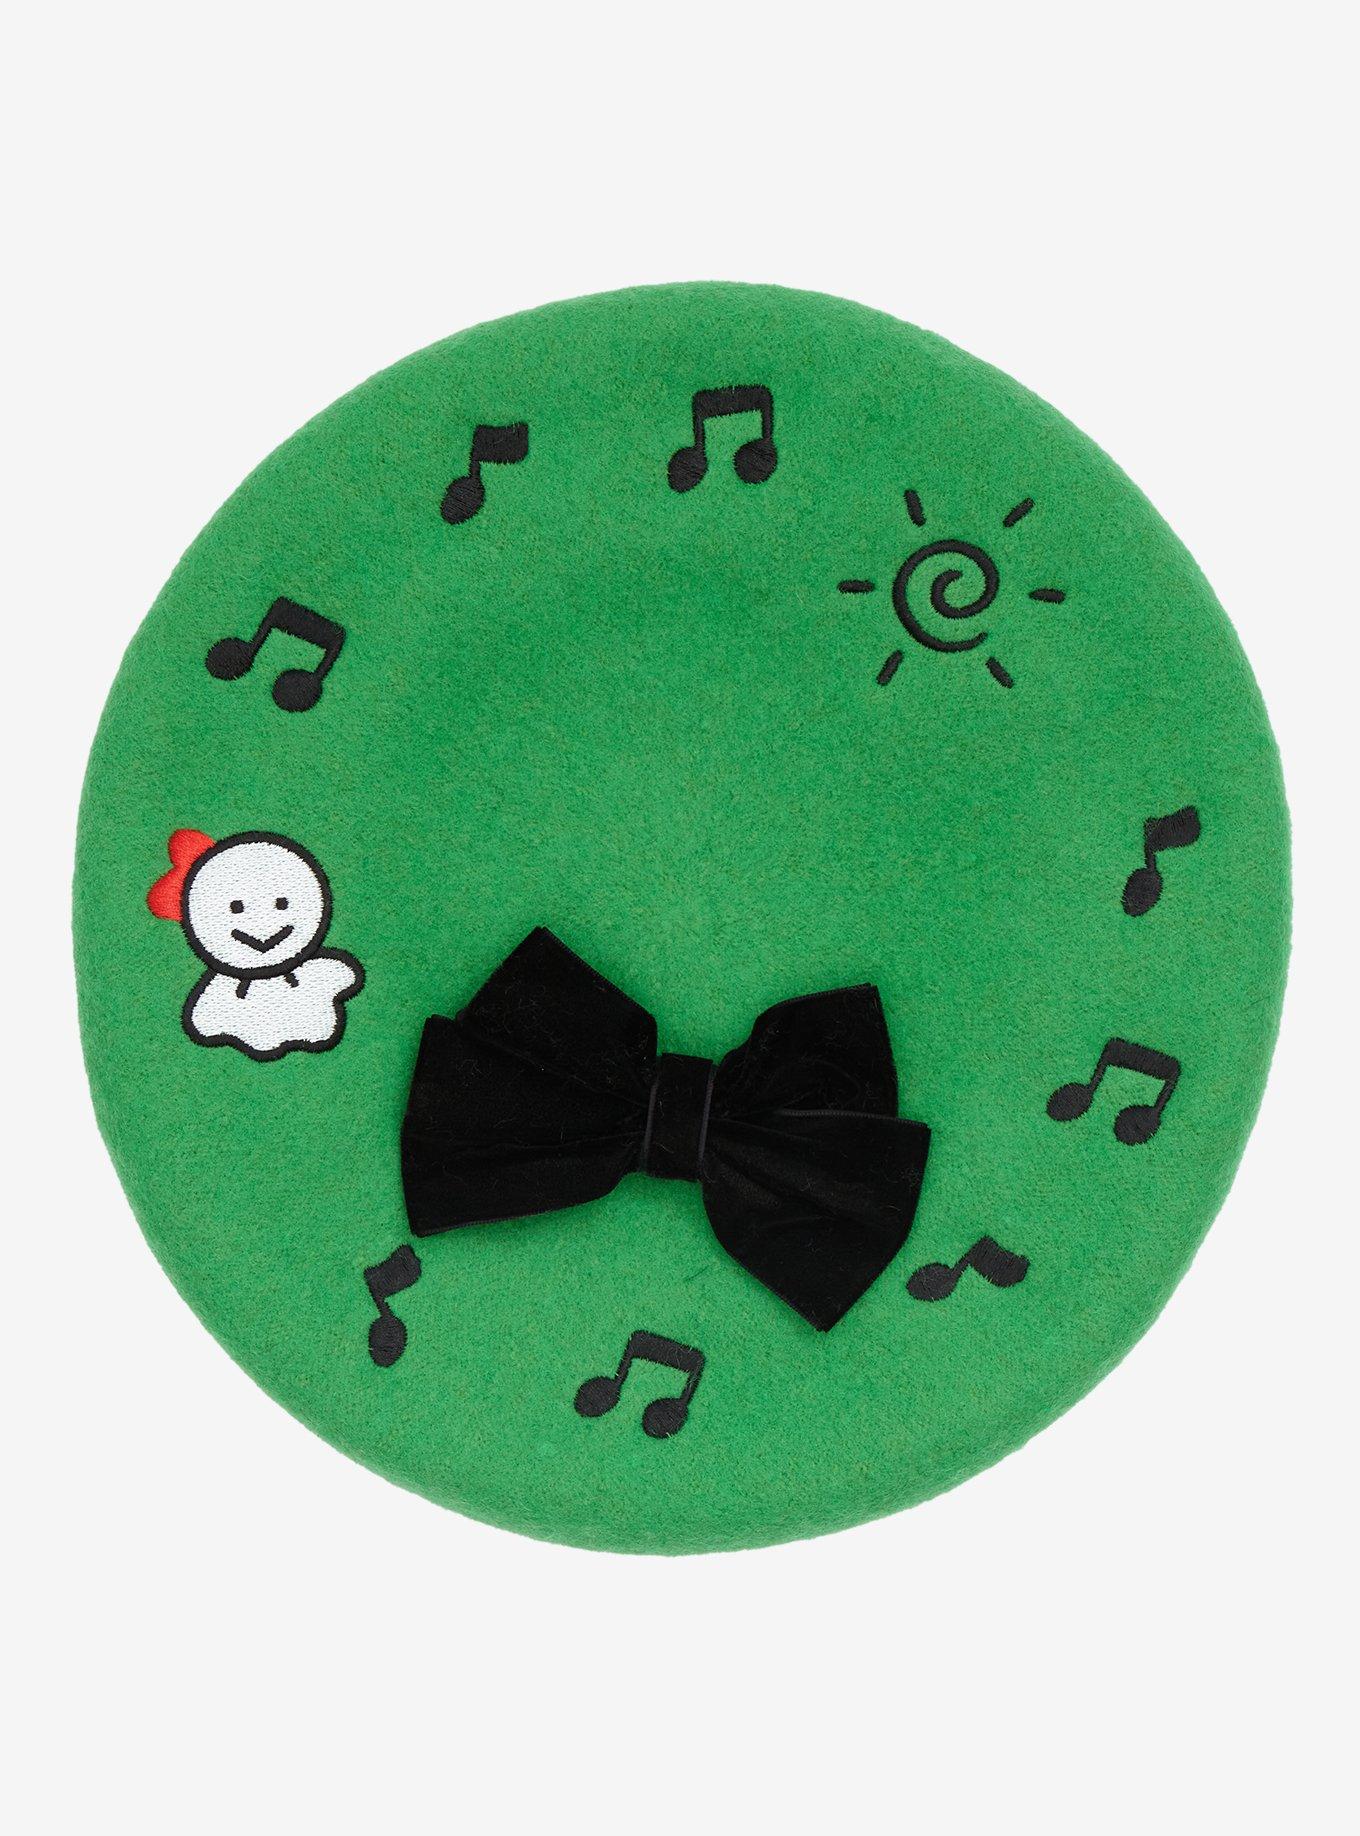 Berets Patricks Day Costume St Accessories Green Top Hat God